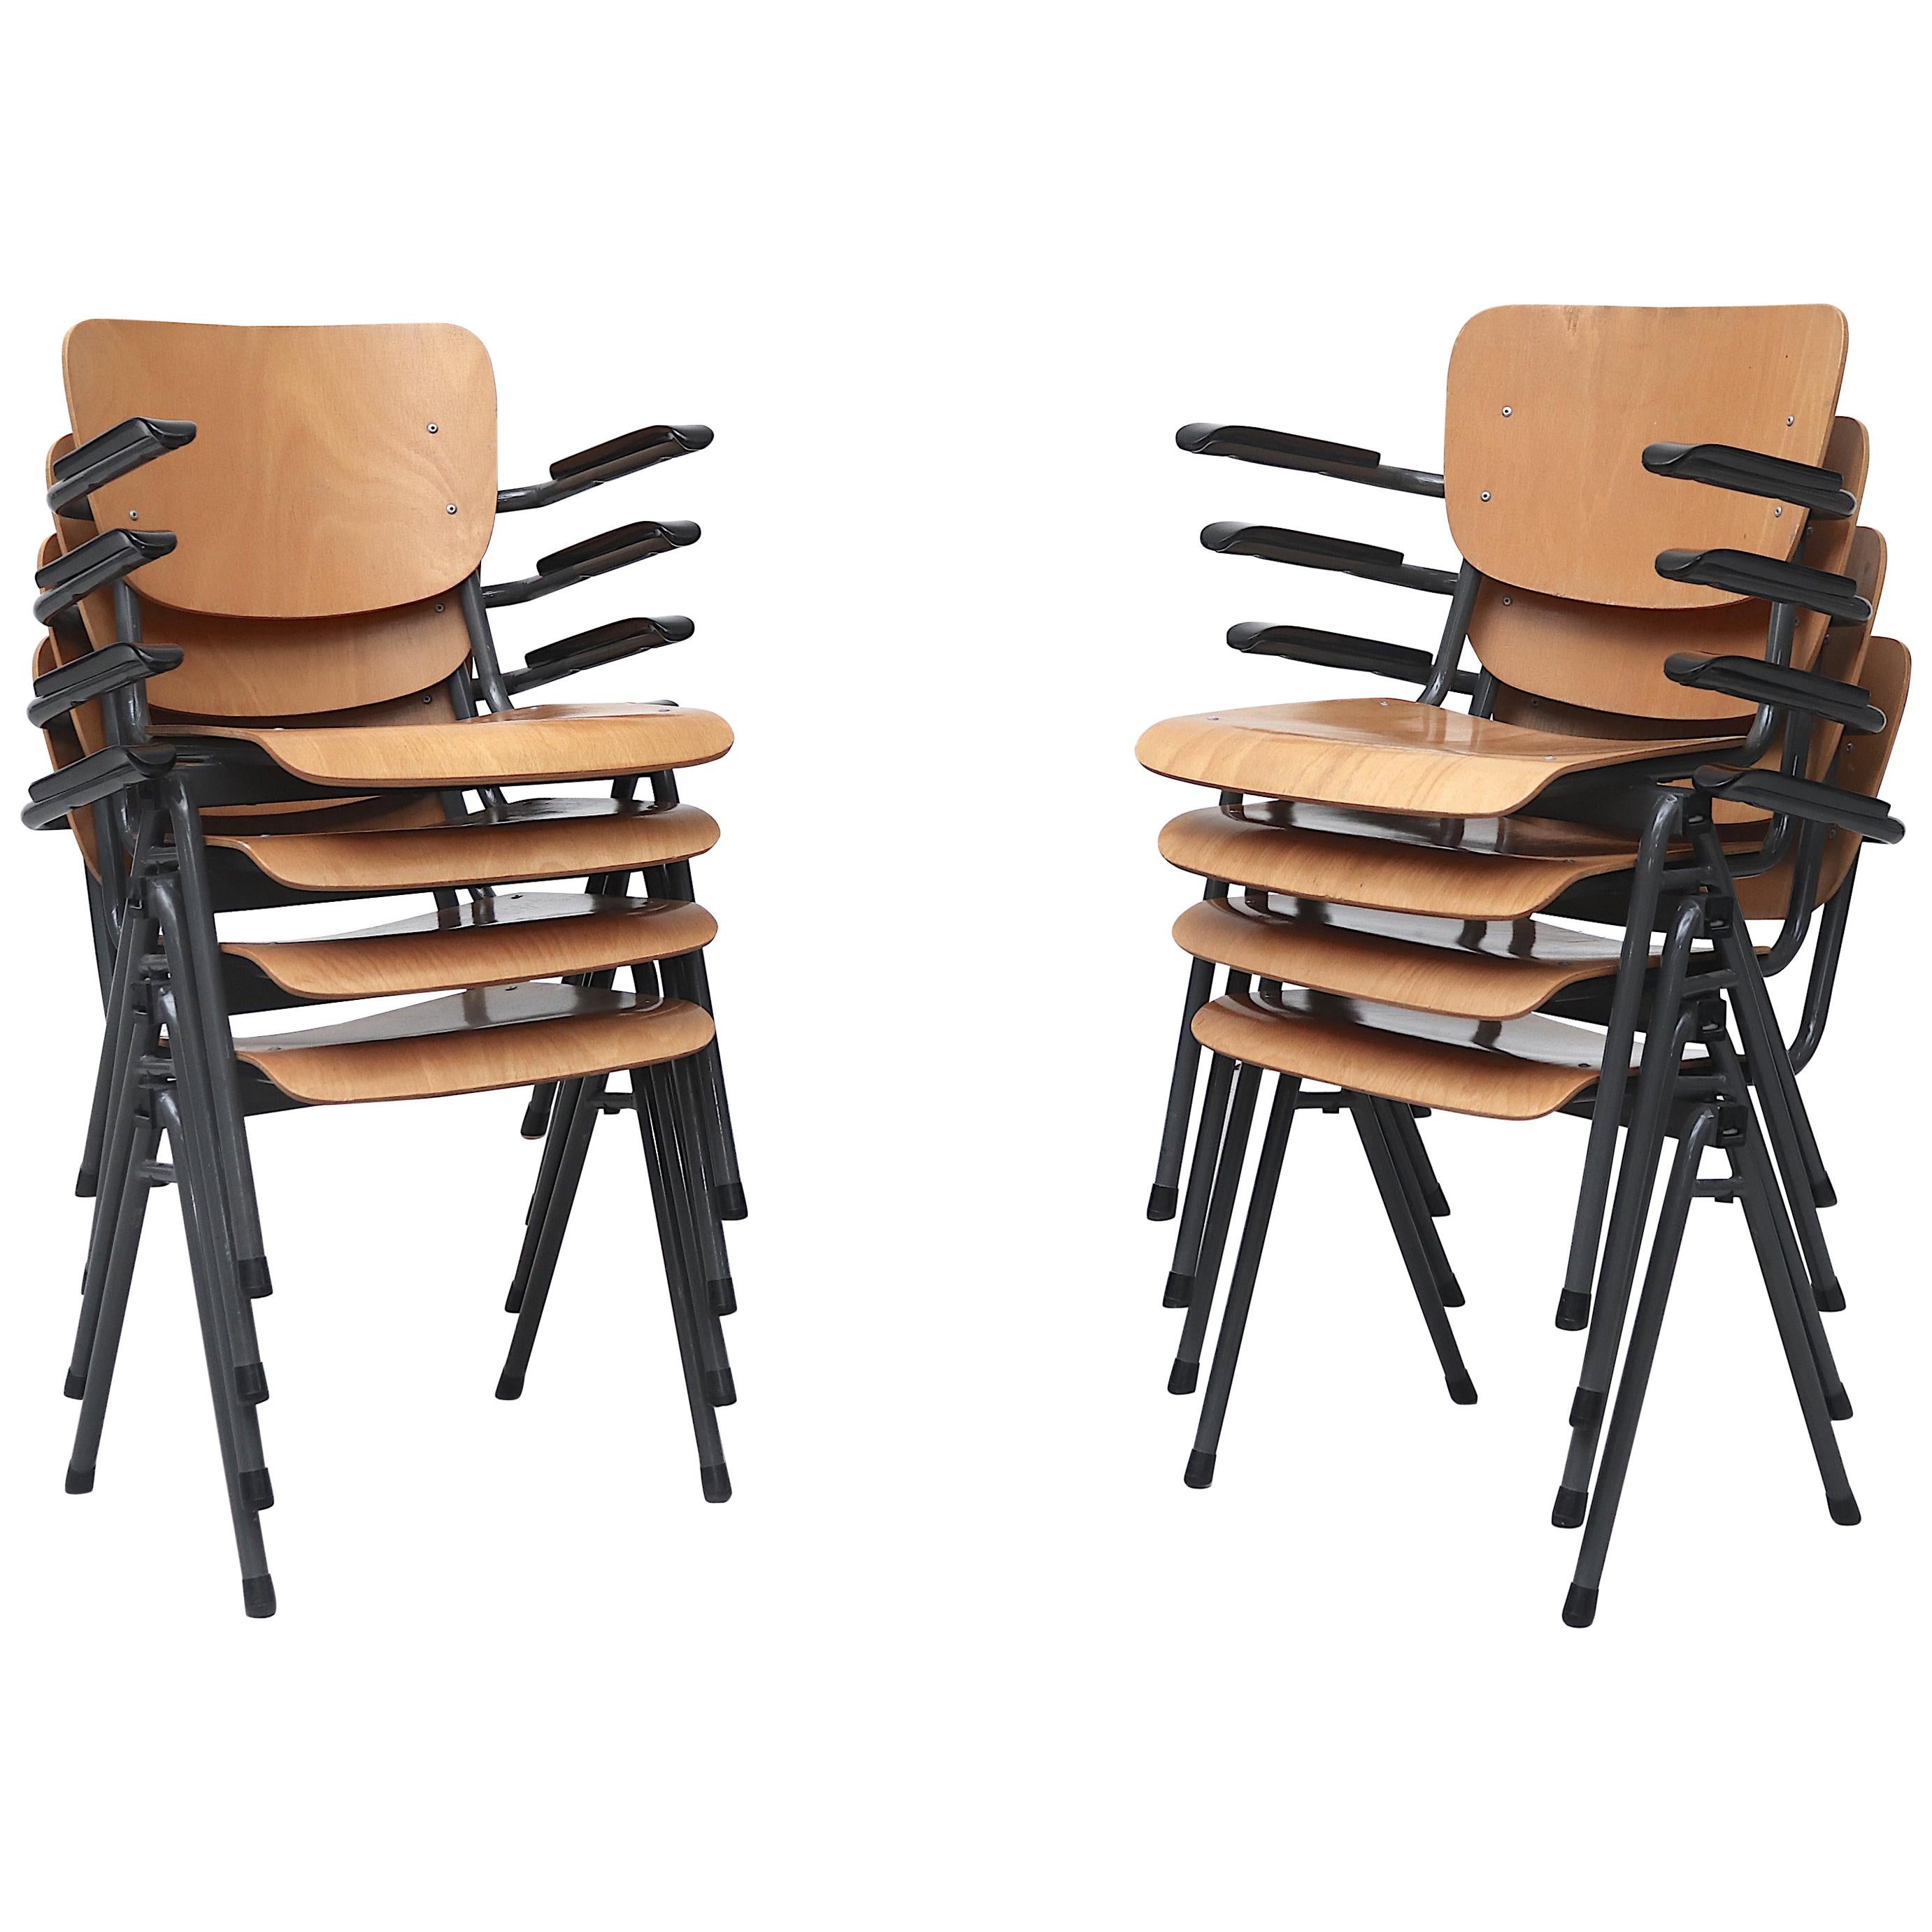 Set of 4 Gispen Style Plywood Stacking School Chairs with Arm Rests